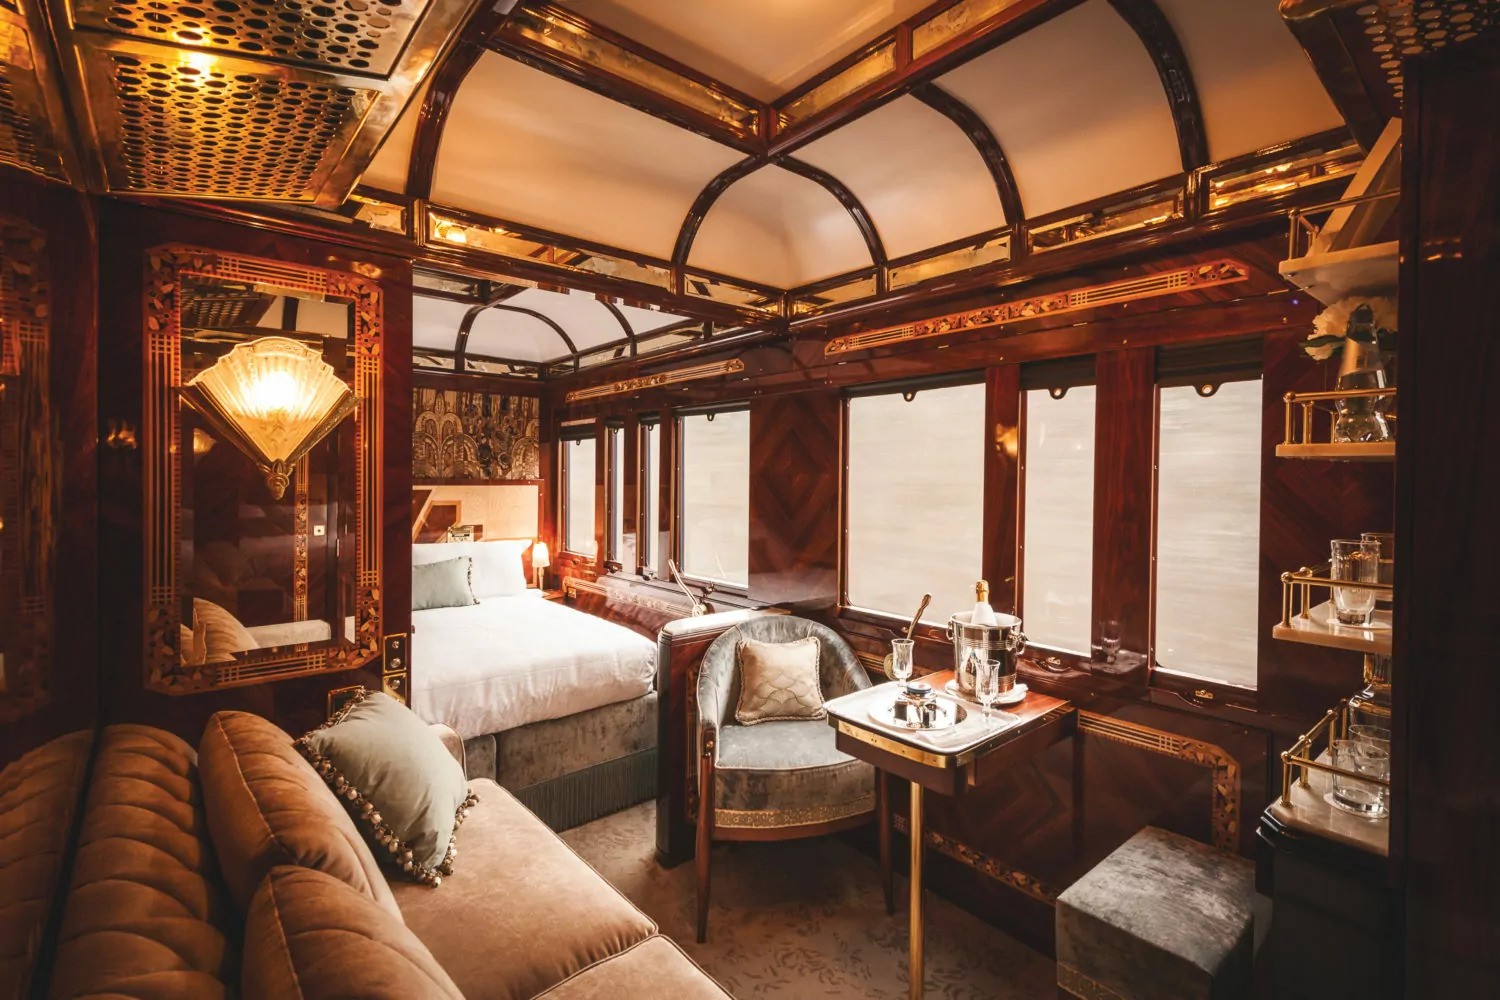 Gallery of 3 images of Venice Simplon-Orient-Express